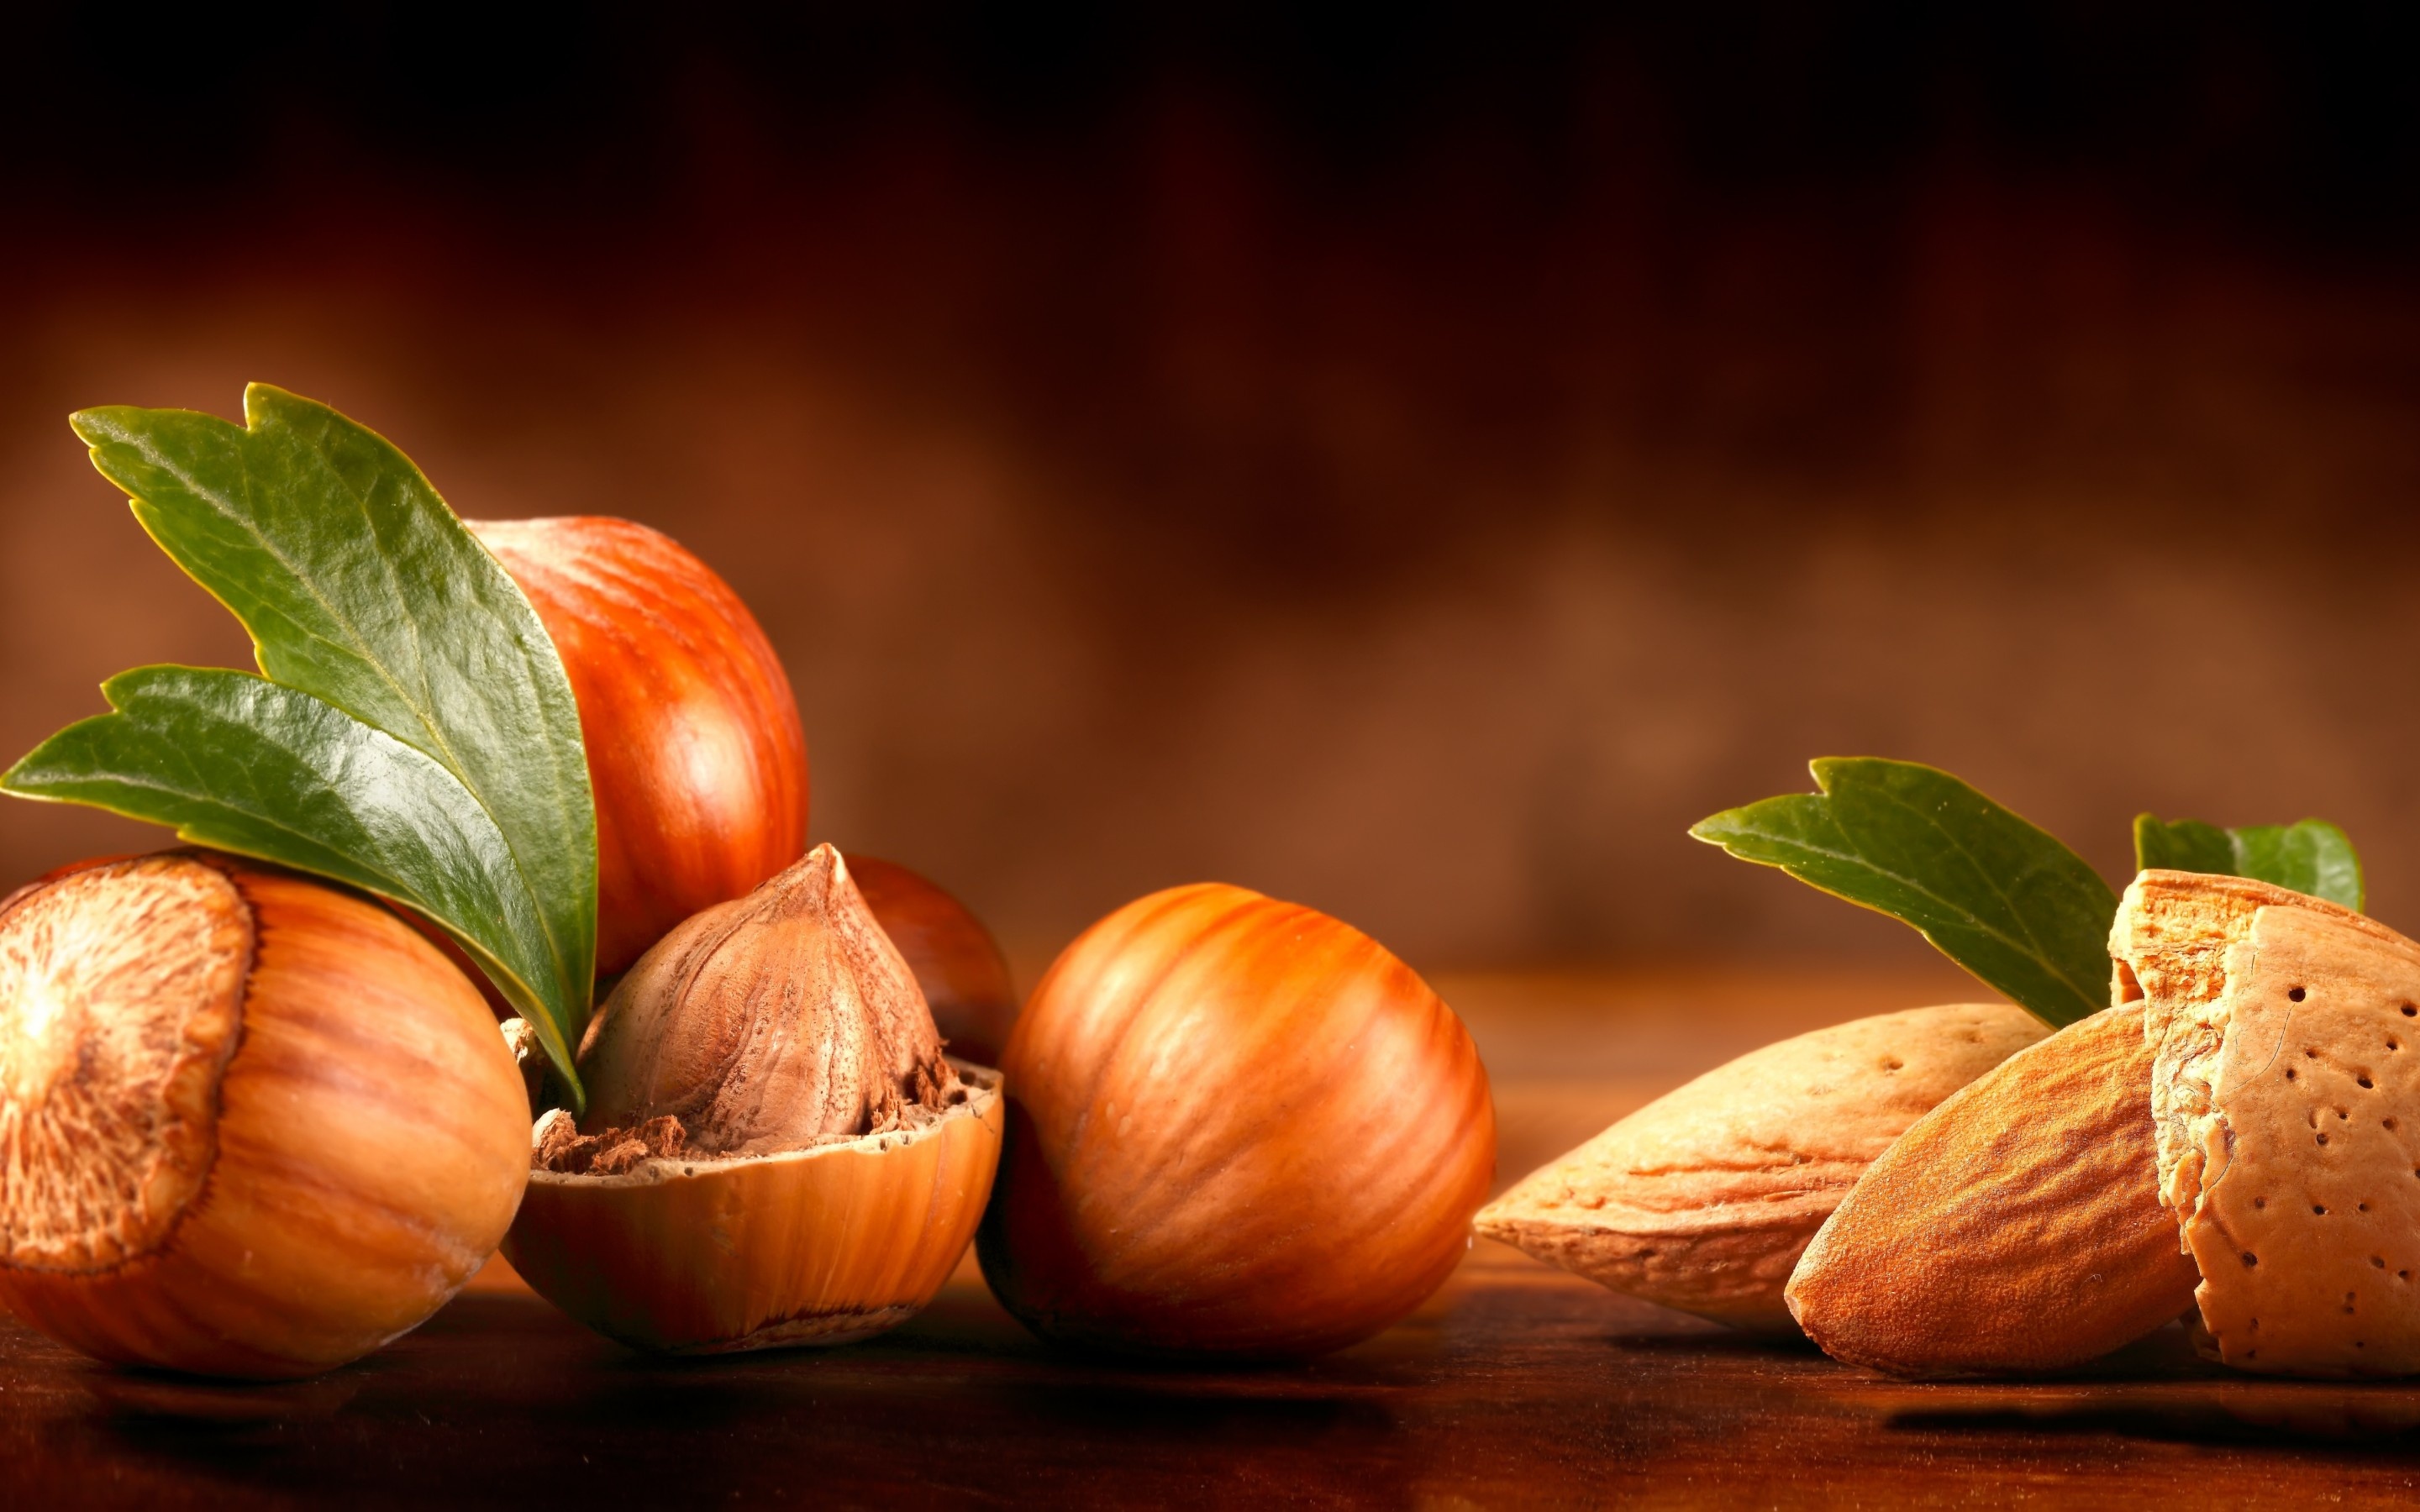 Nuts: Hazelnuts, Used as a confectionery item like praline. 2880x1800 HD Wallpaper.